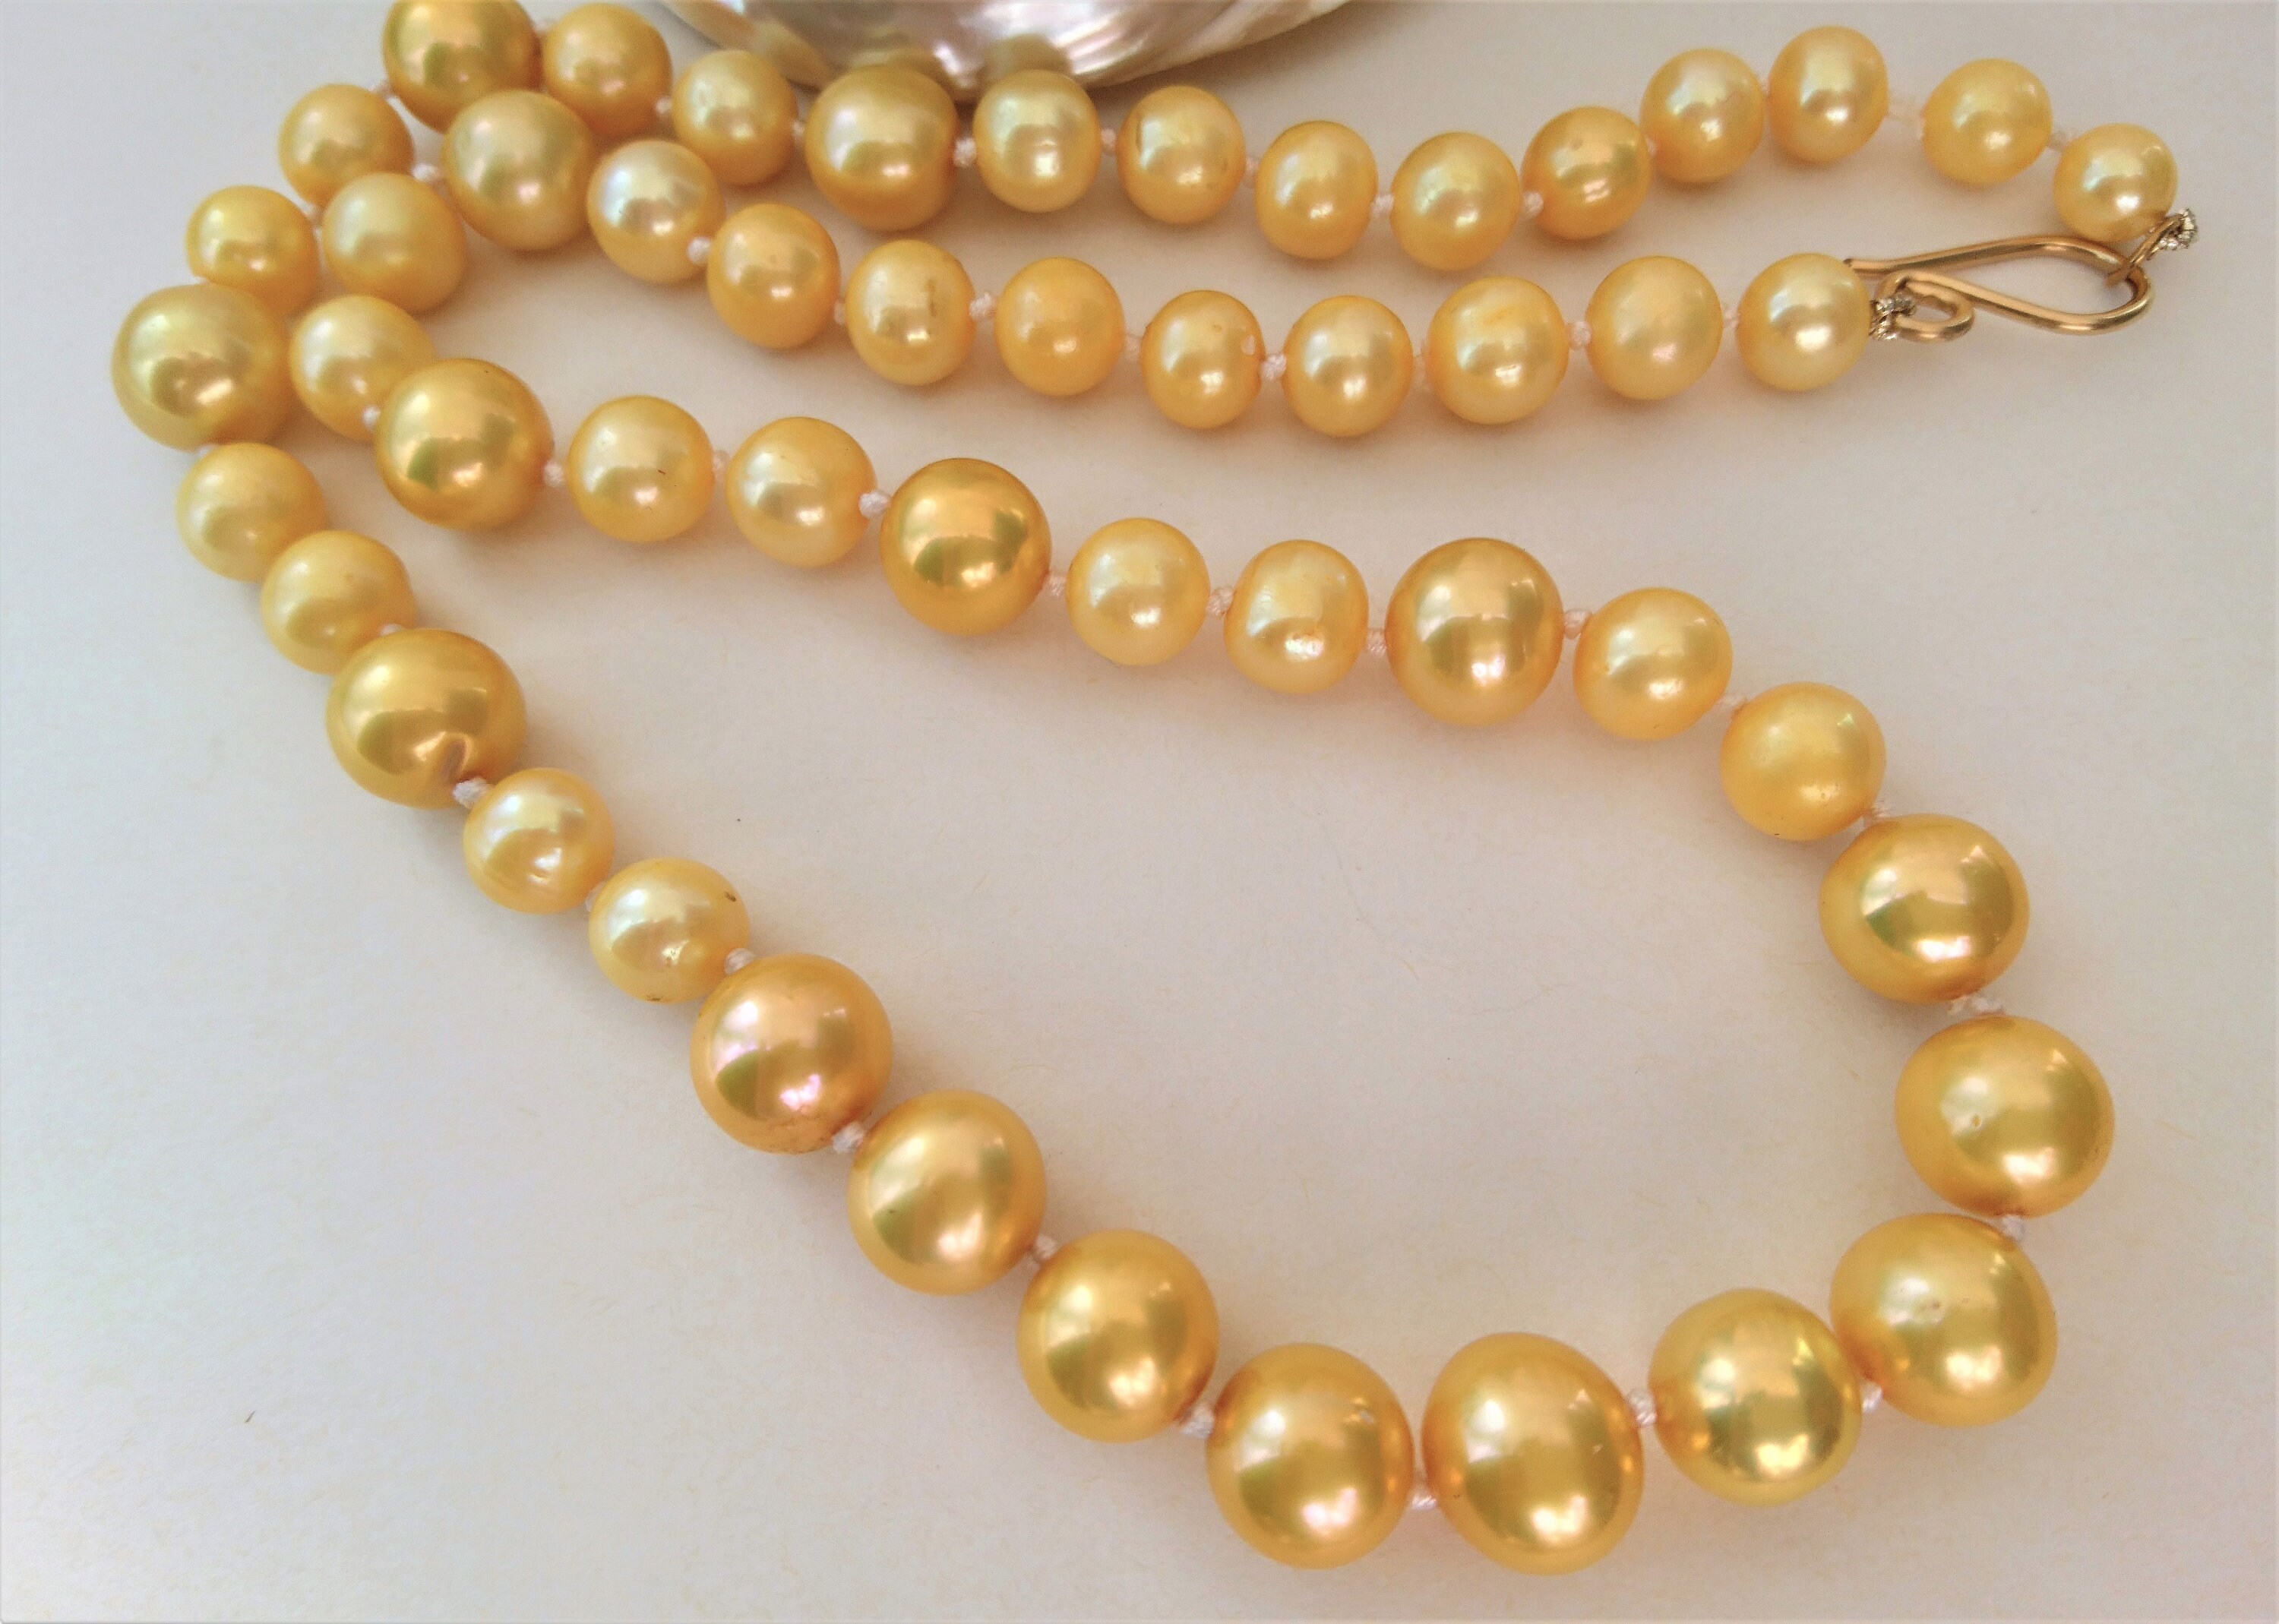 Real pearl. Pearl necklace. Canary yellow dye enhanced pearls. | Etsy